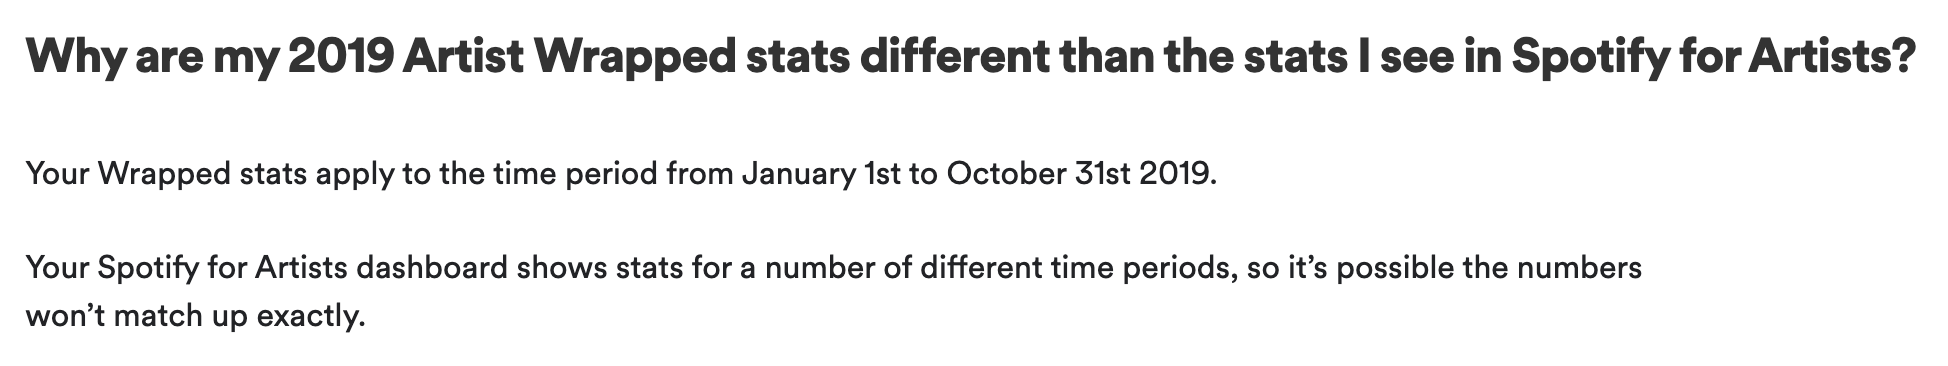 Screenshot of Spotify FAQ question “Why are my 2019 Artist Wrapped stats different from the stats I see in Spotify for Artists?